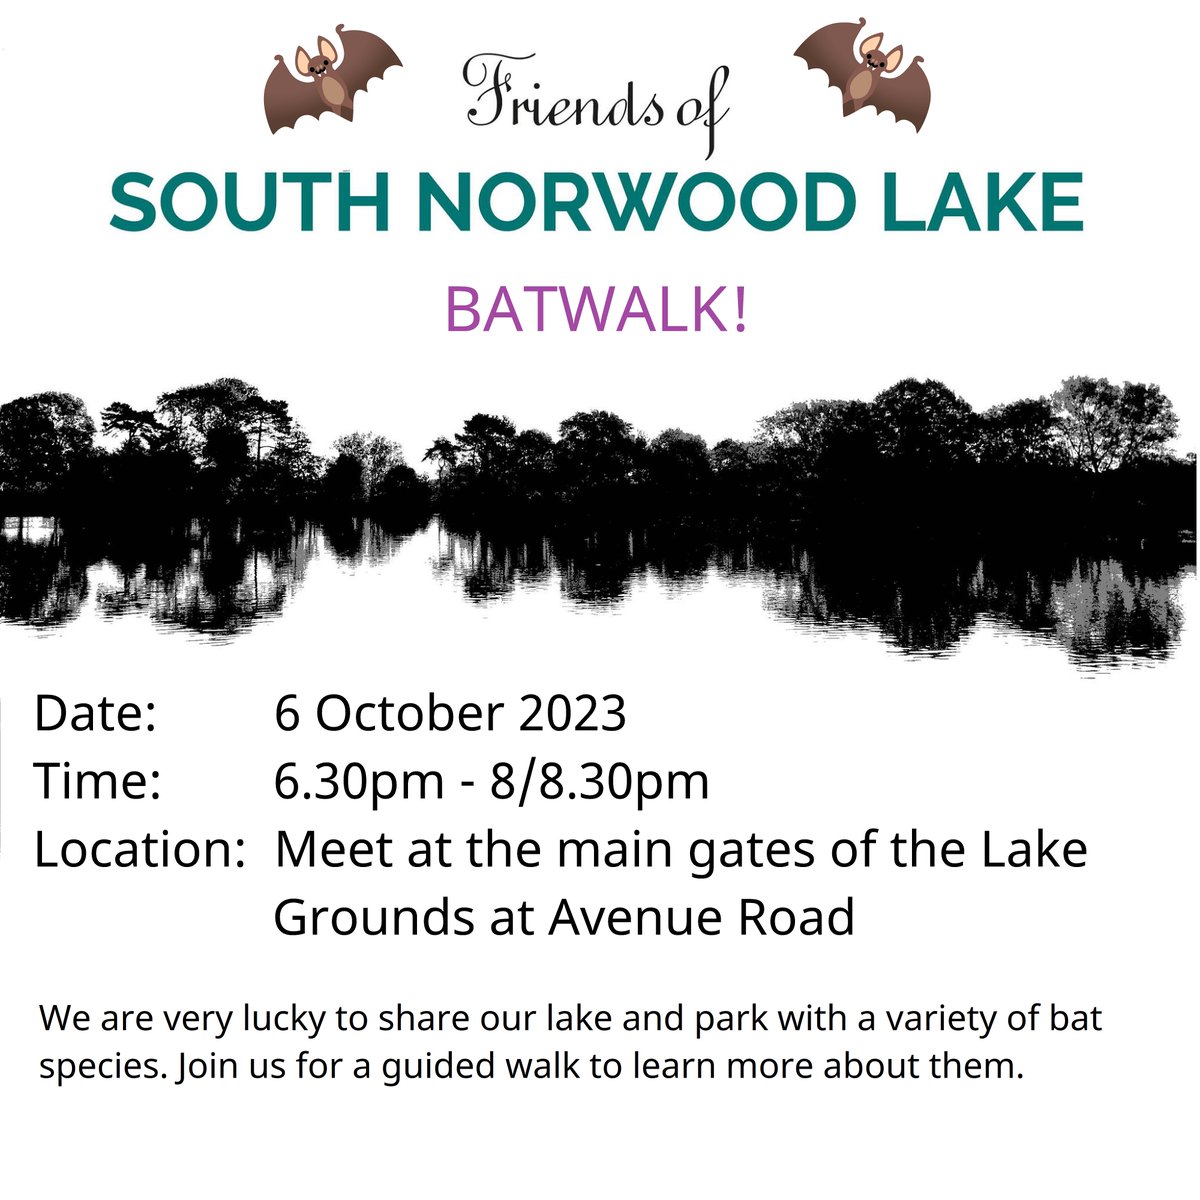 BATWALK!!
Join Friends of South Norwood Lake and Grounds for a #batwalk on 6 October 2023!  Details below!

#southnorwood #southnorwoodlake #SE25 #naturewalk #naturetrail